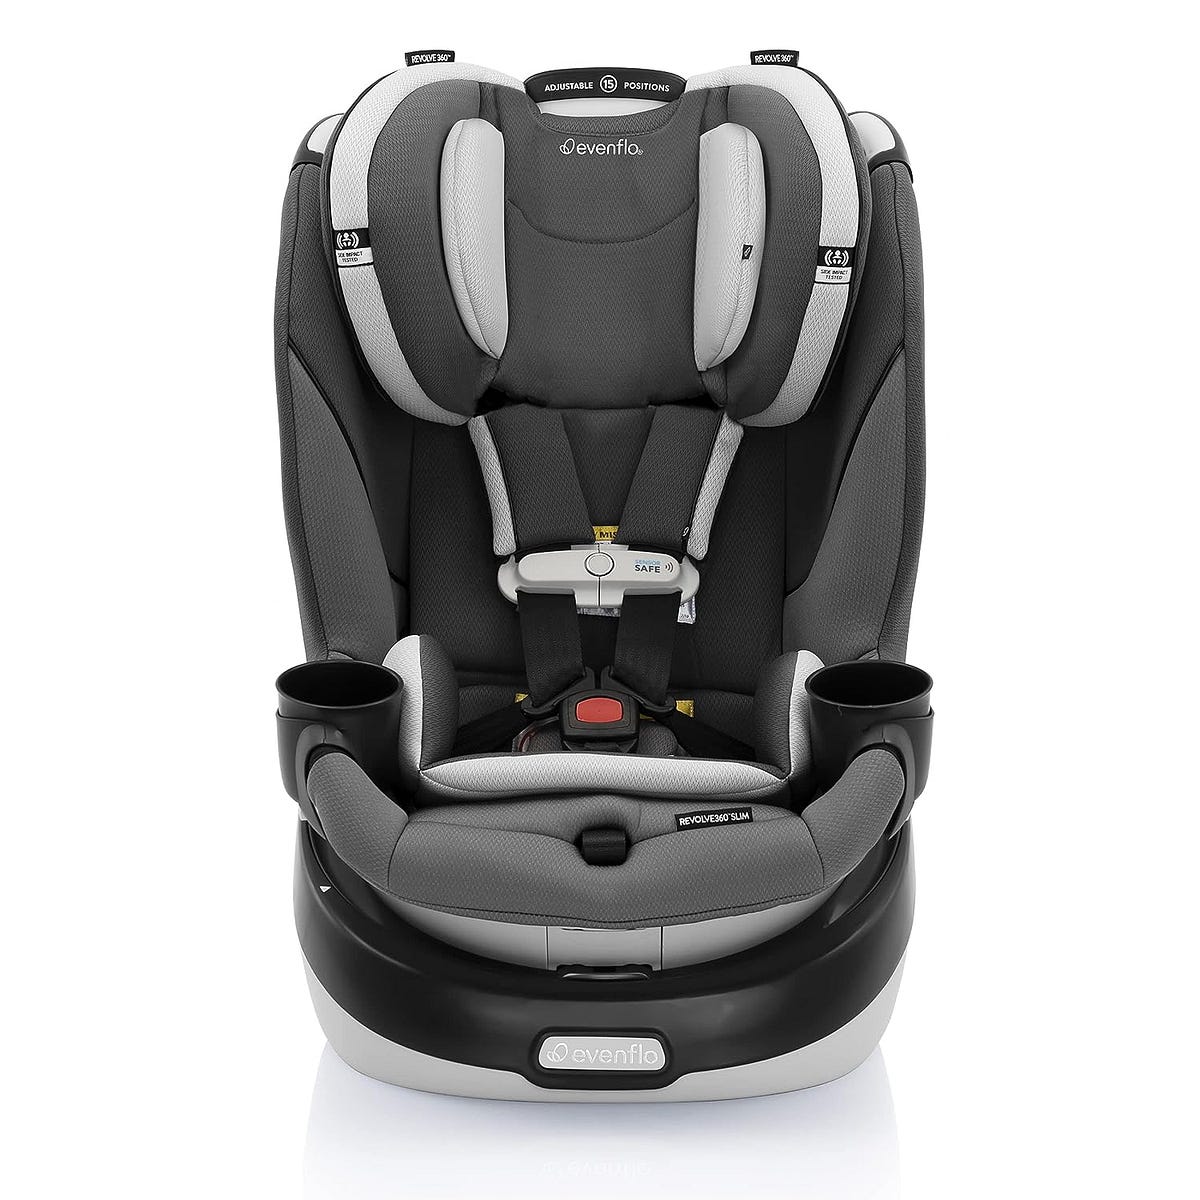 The Kiddy Comfort Pro car seat - It saves lives - No Ordinary Homestead